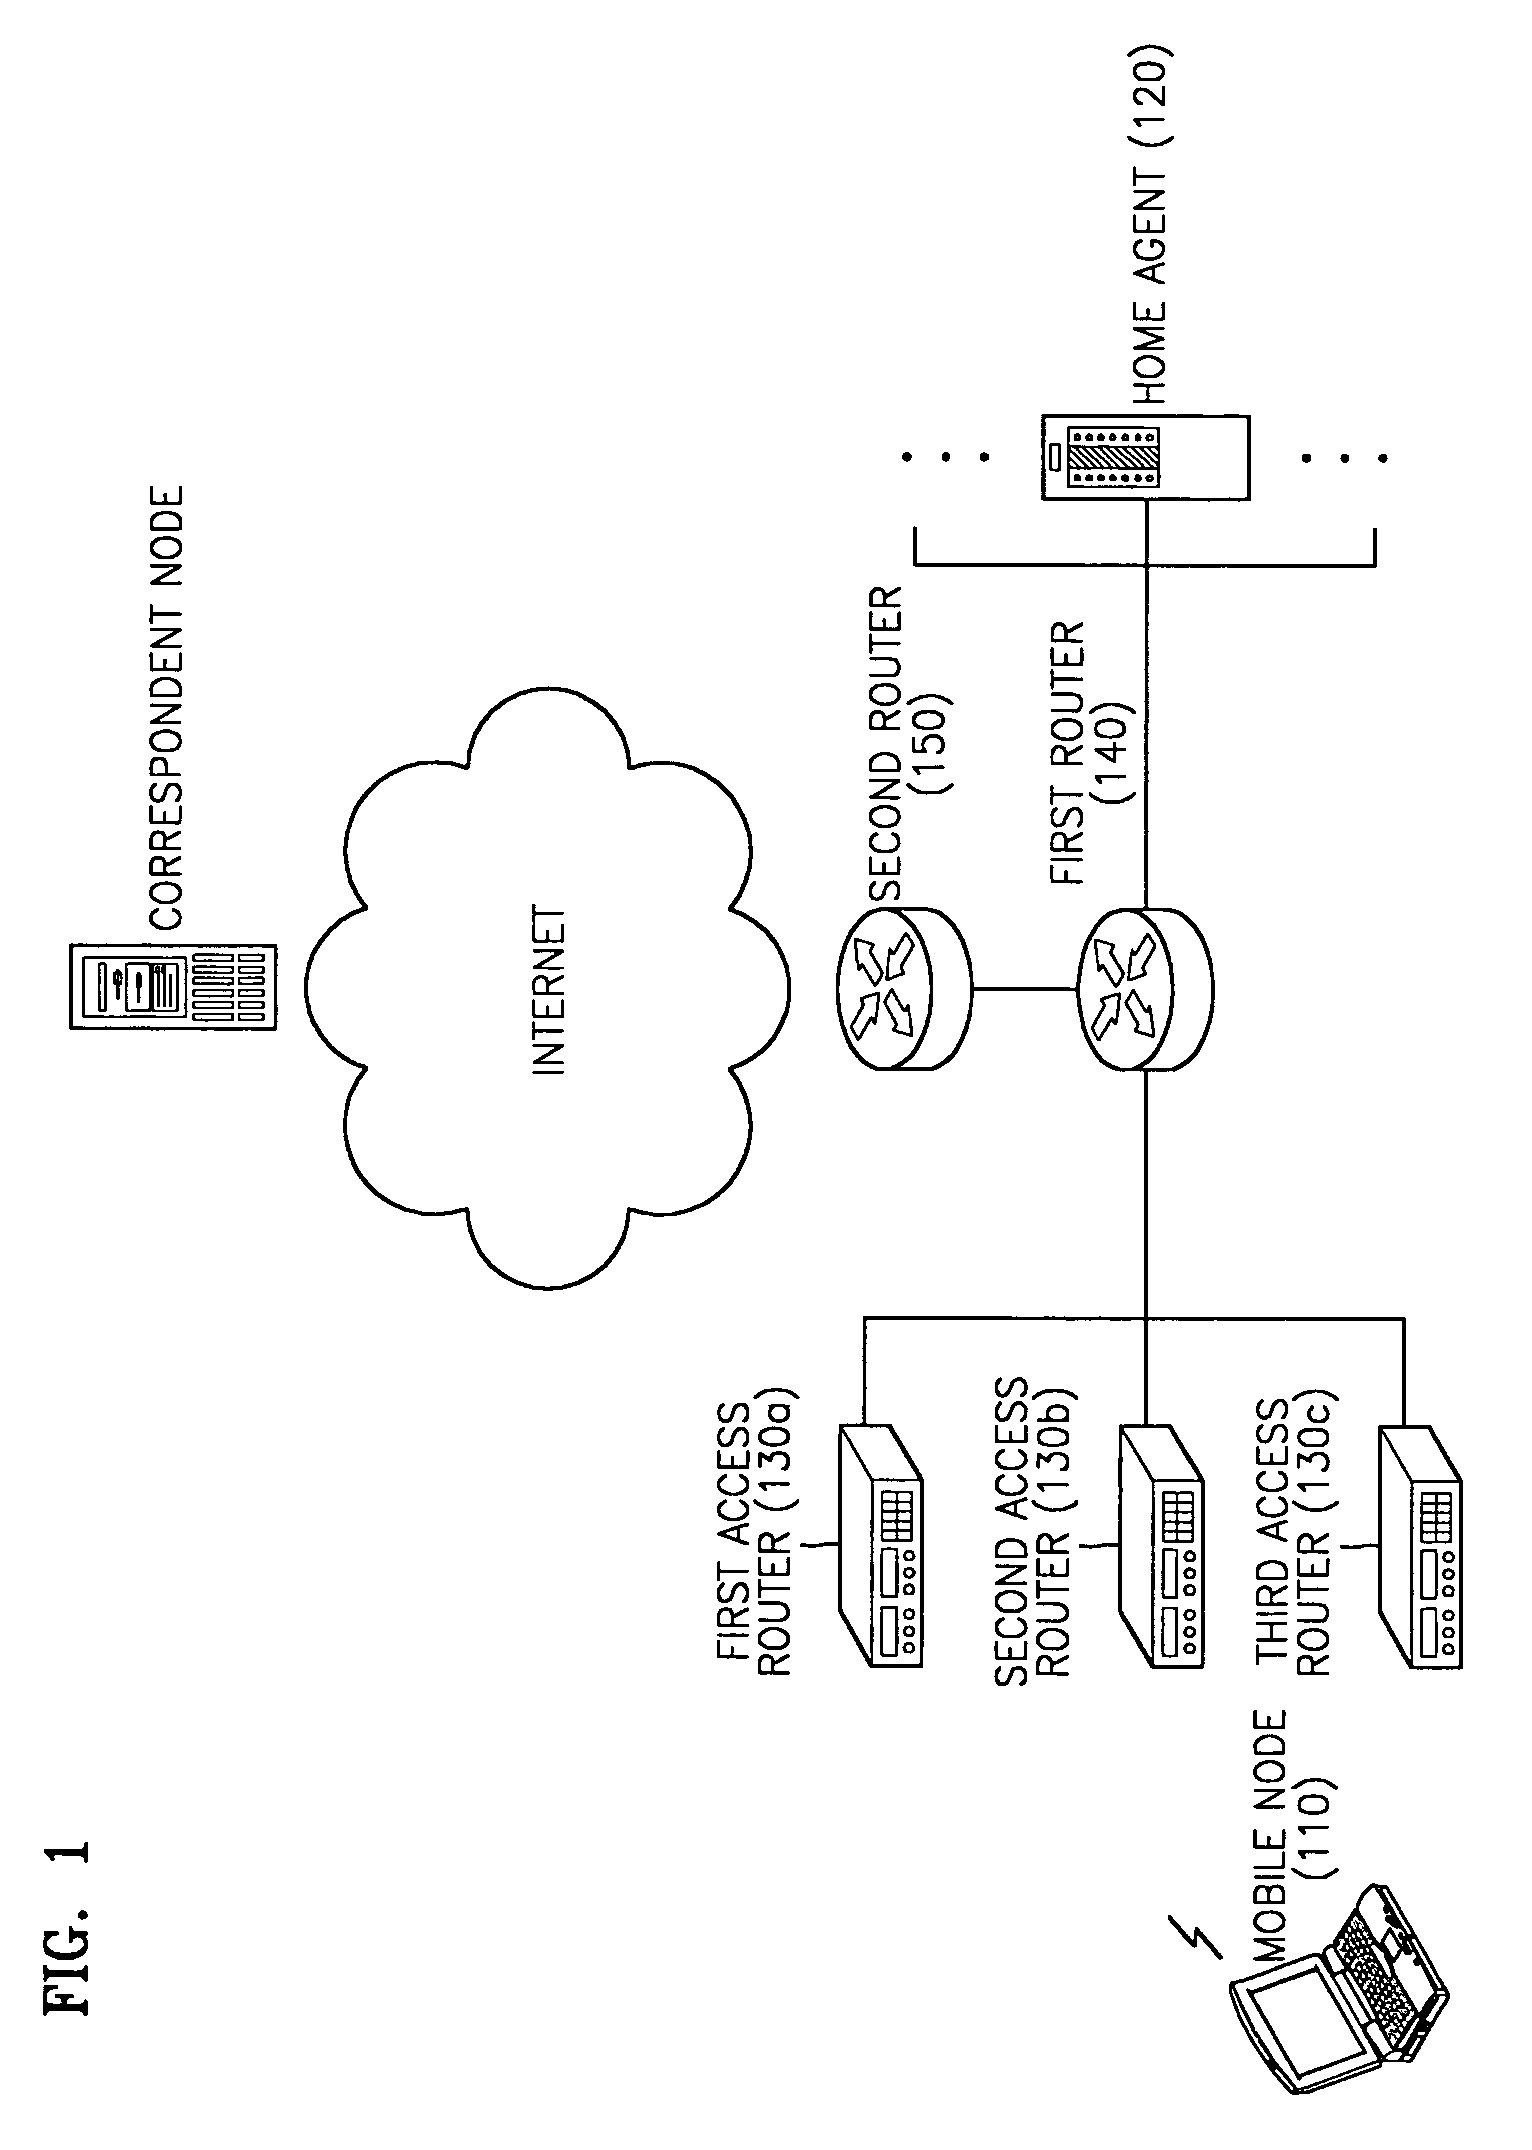 Home agent management apparatus and method